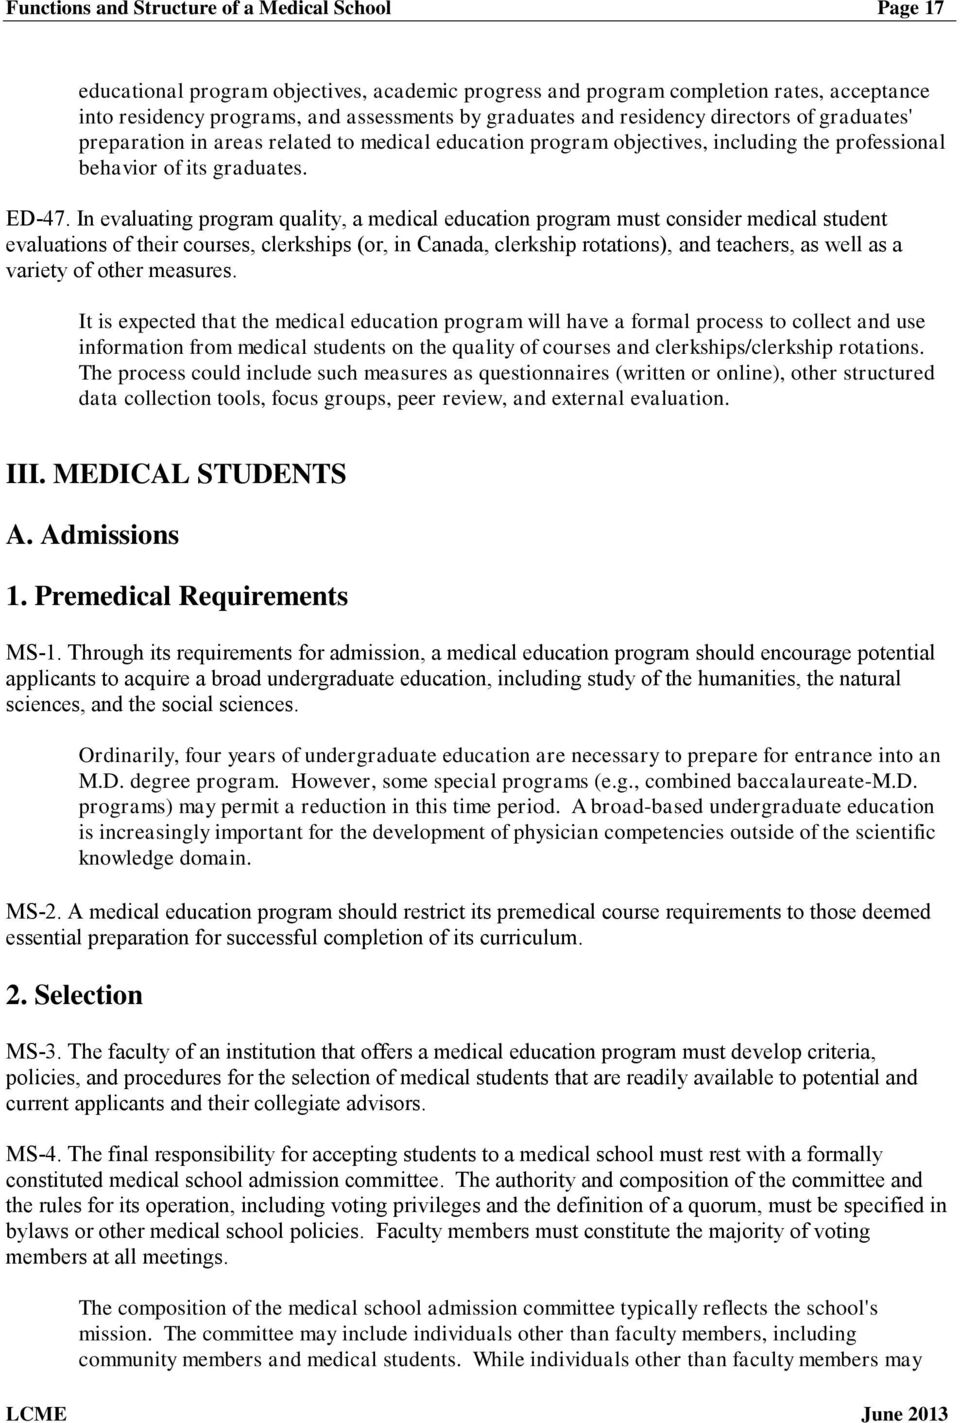 In evaluating program quality, a medical education program must consider medical student evaluations of their courses, clerkships (or, in Canada, clerkship rotations), and teachers, as well as a